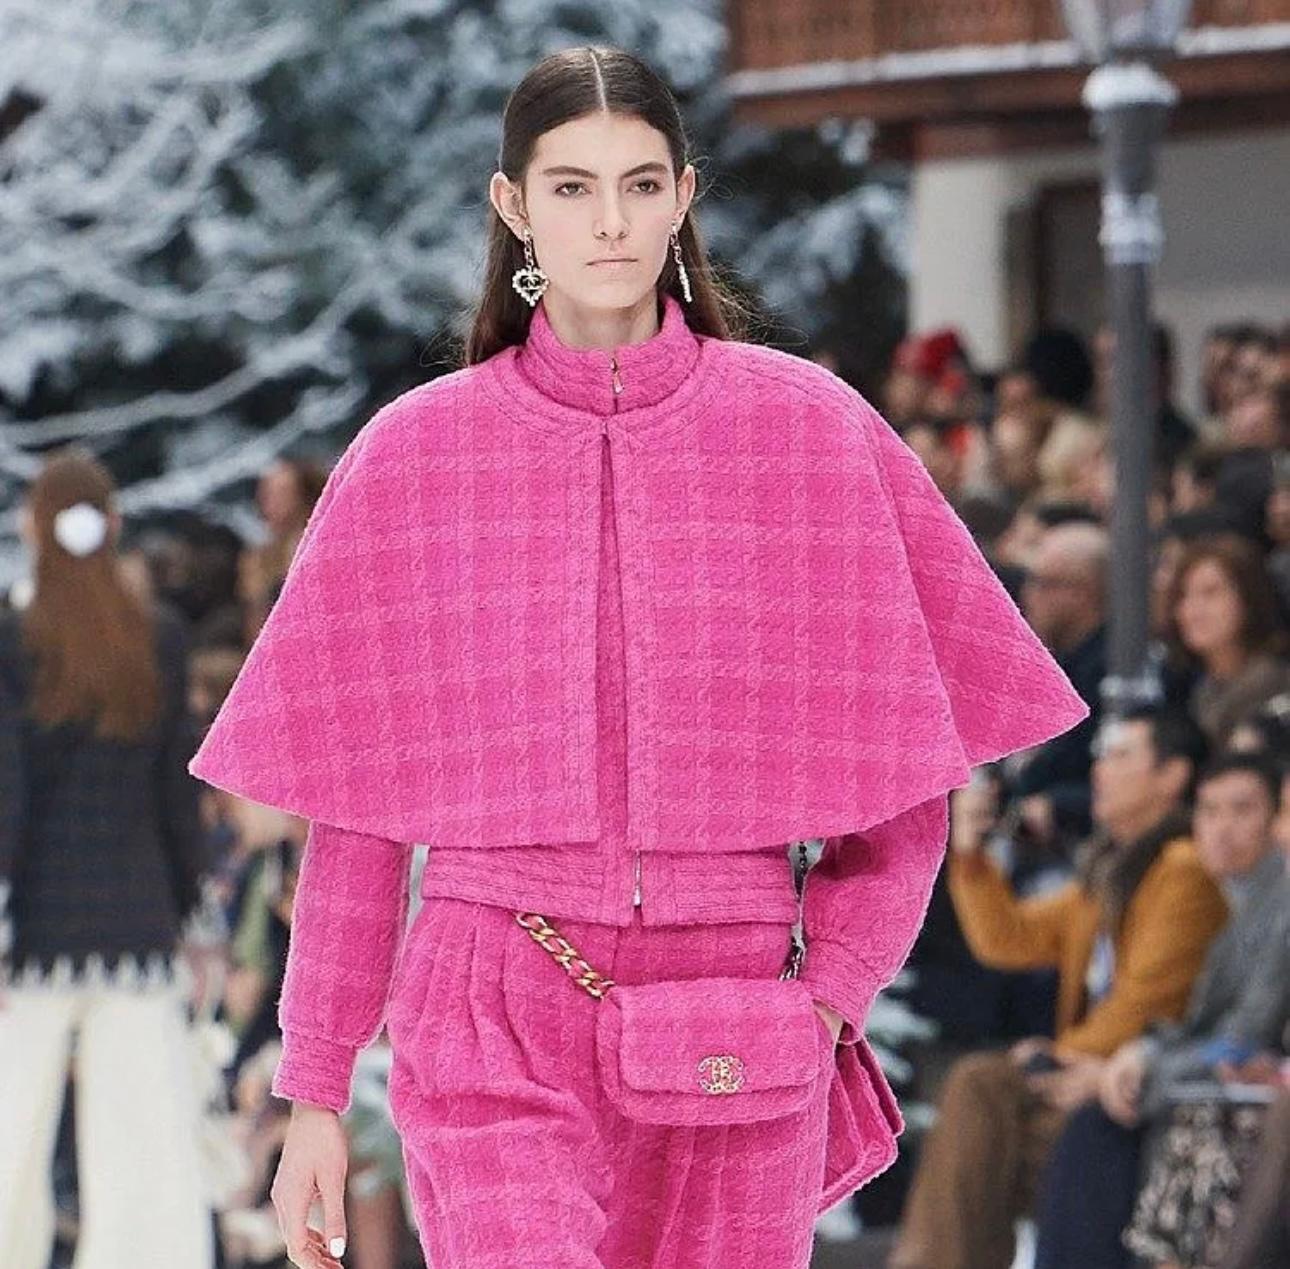 New iconic Chanel fuchsia tweed cape jacket from Runway of 2019 Fall Collection 
As seen on many magazines and on celebs!
- CC logo charm at side
Size mark 38 FR, comes with tags attached